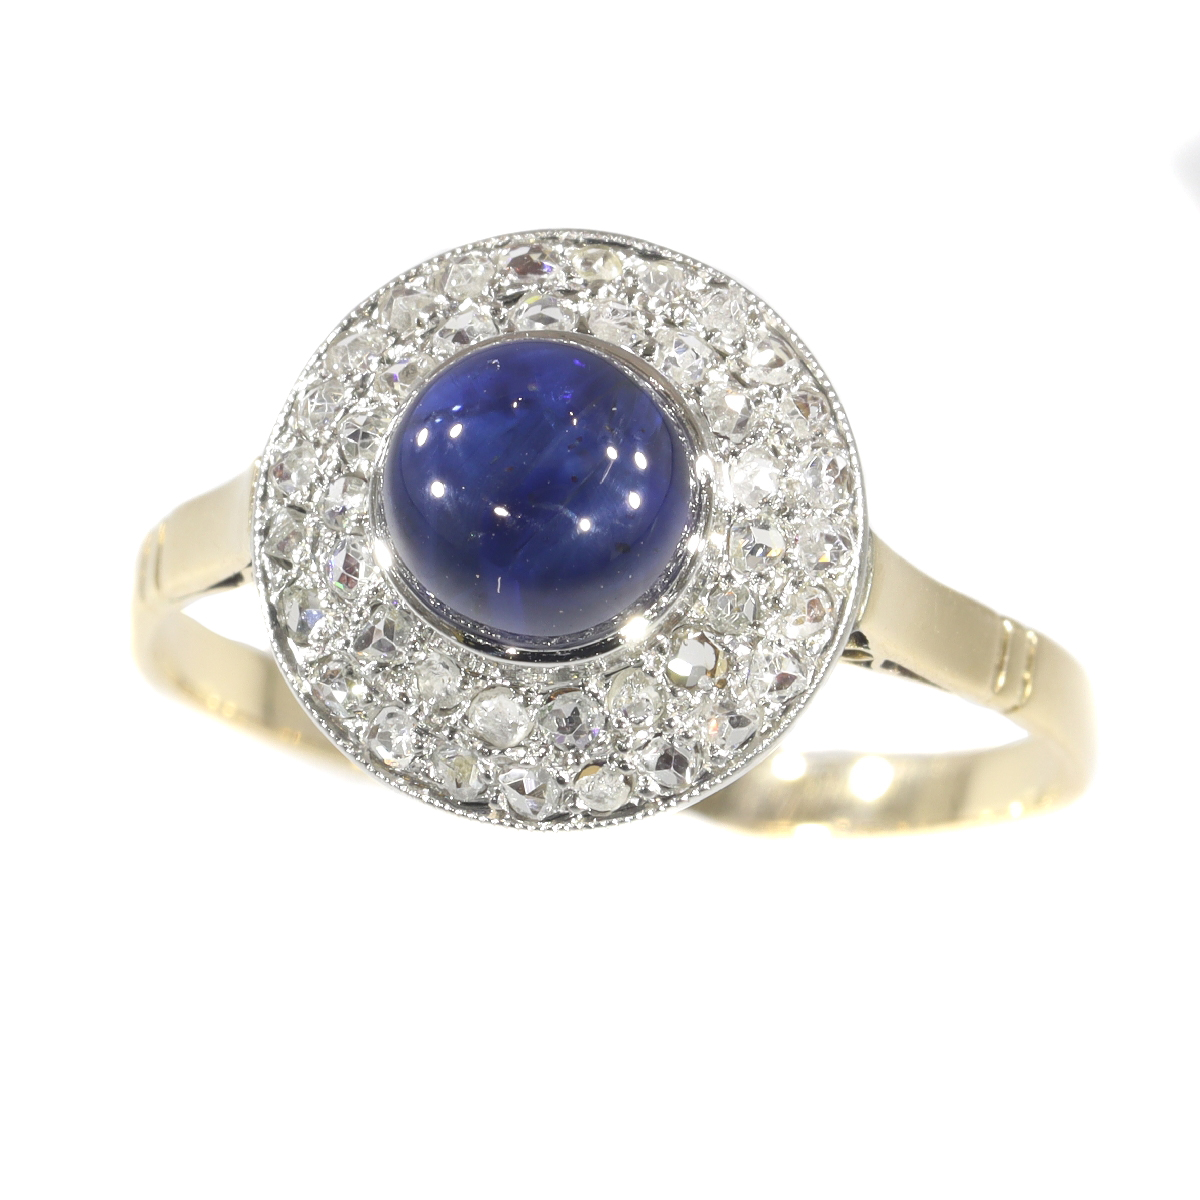 Vintage Art Deco diamond and high domed cabochon sapphire ring